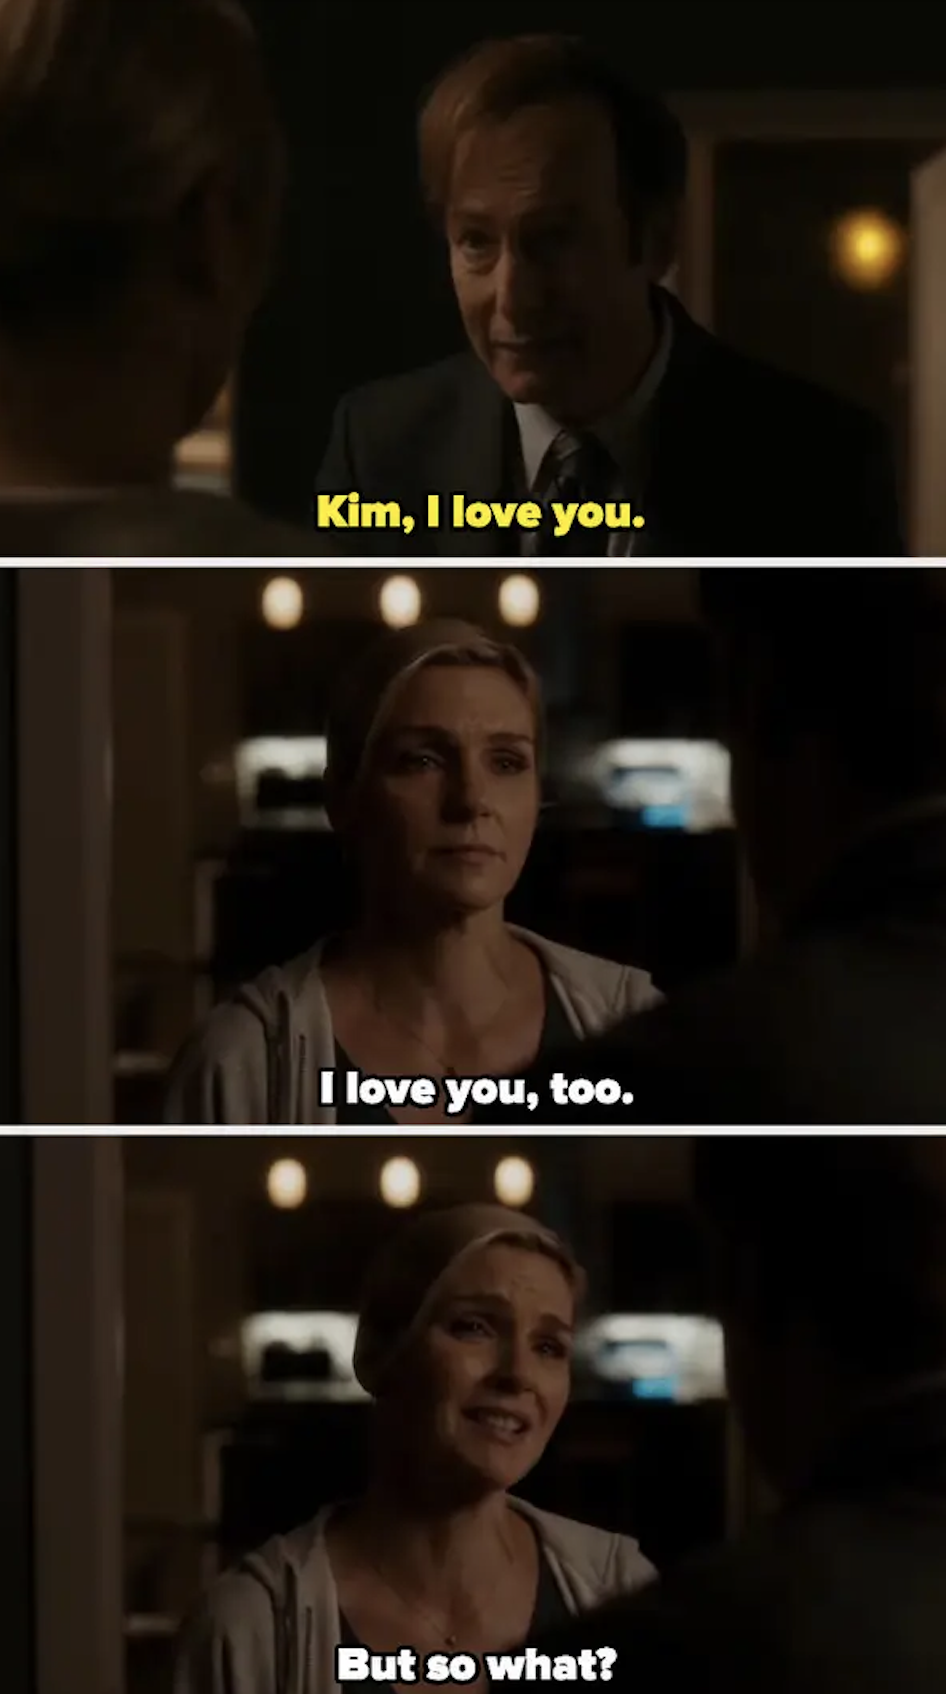 Saul: &quot;Kim, I love you.&quot; Kim: &quot;I love you, too. But so what?&quot;